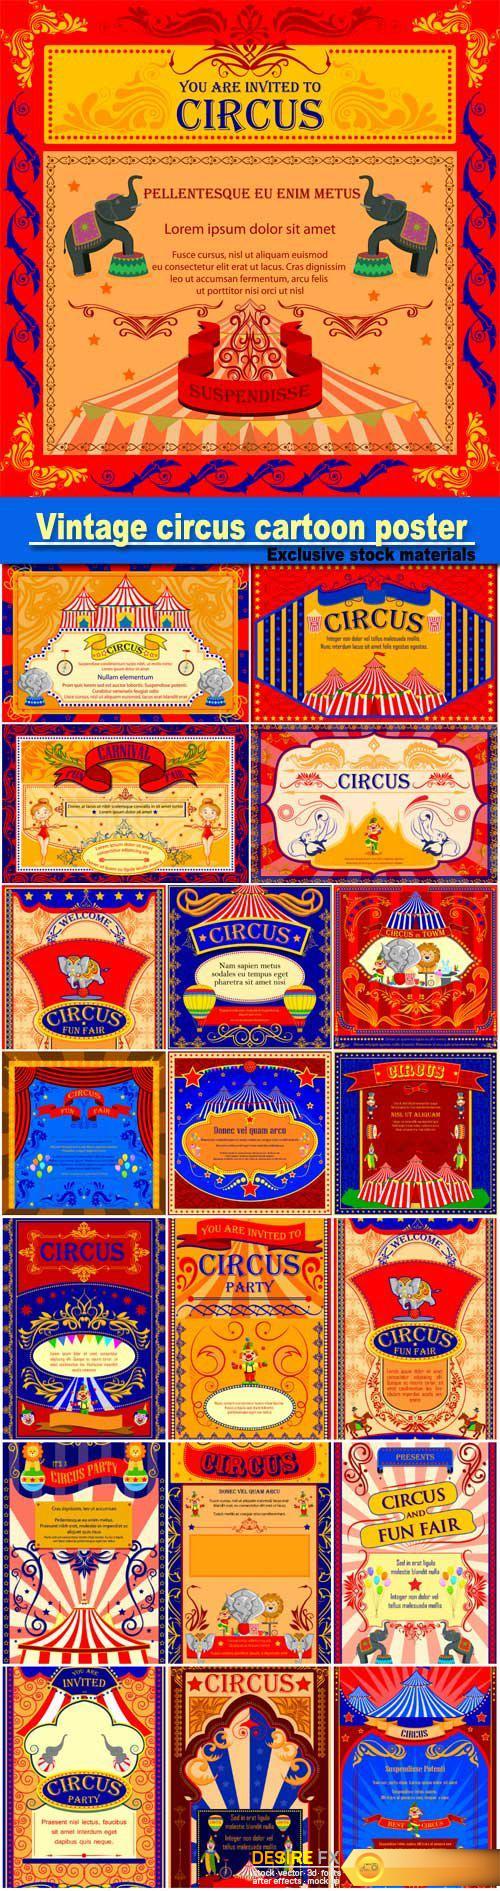 Vintage circus cartoon poster, invitation for party, carnival and advertisment